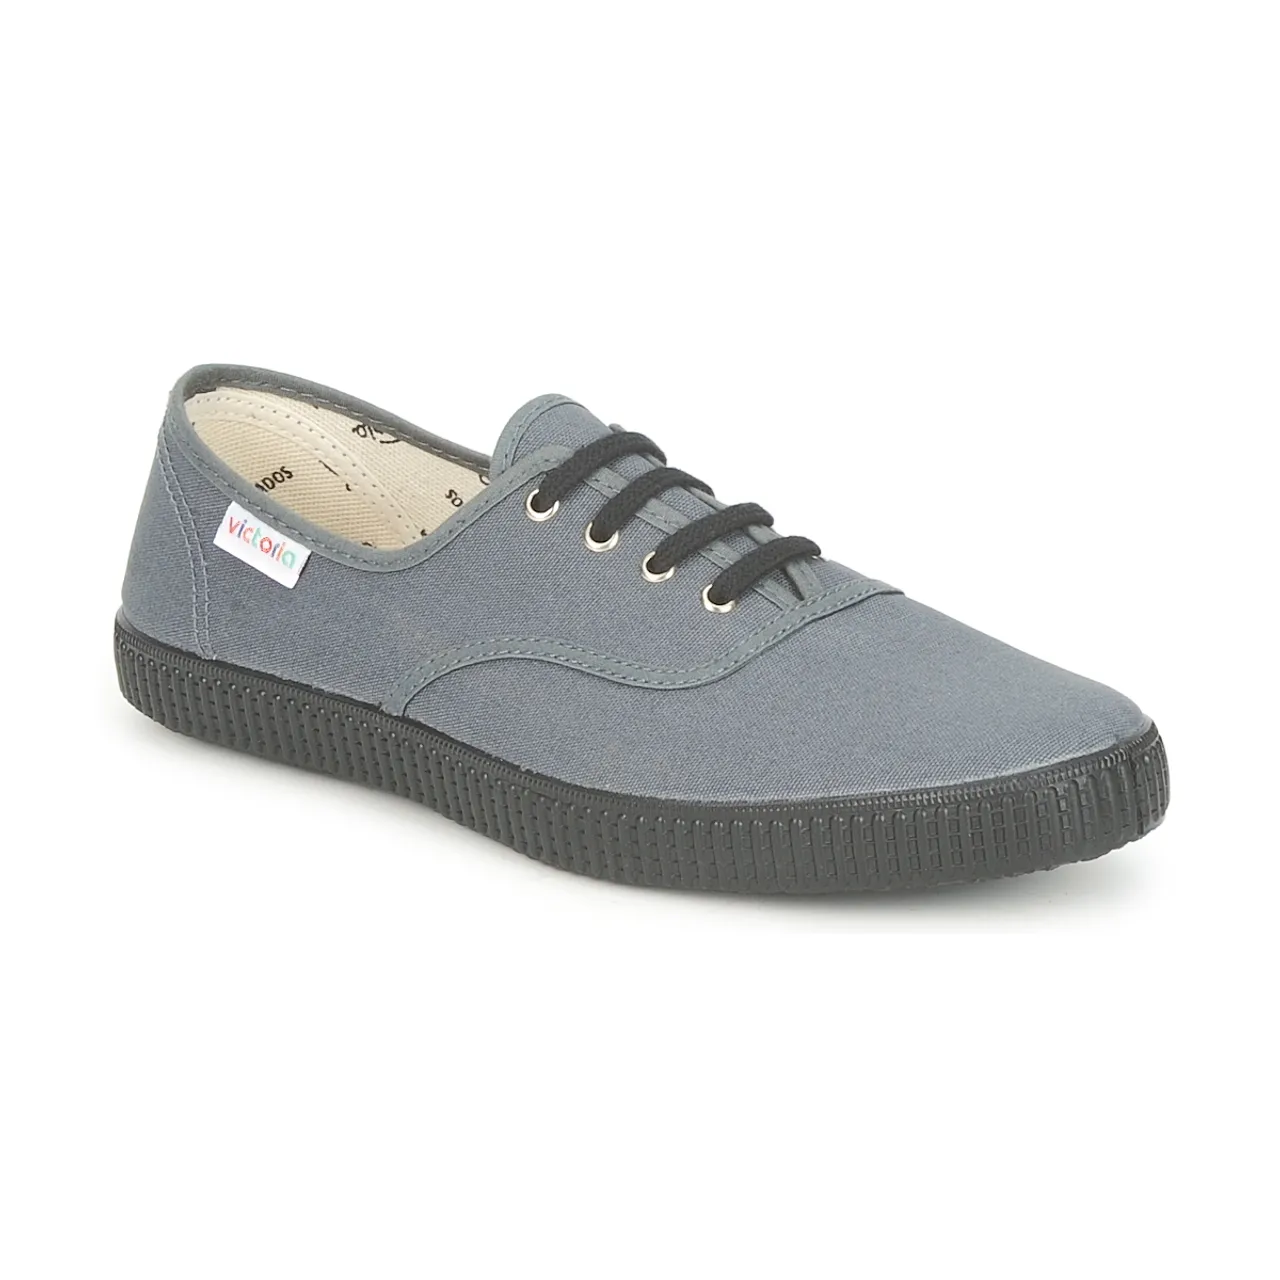 Victoria  6610  women's Shoes (Trainers) in Grey